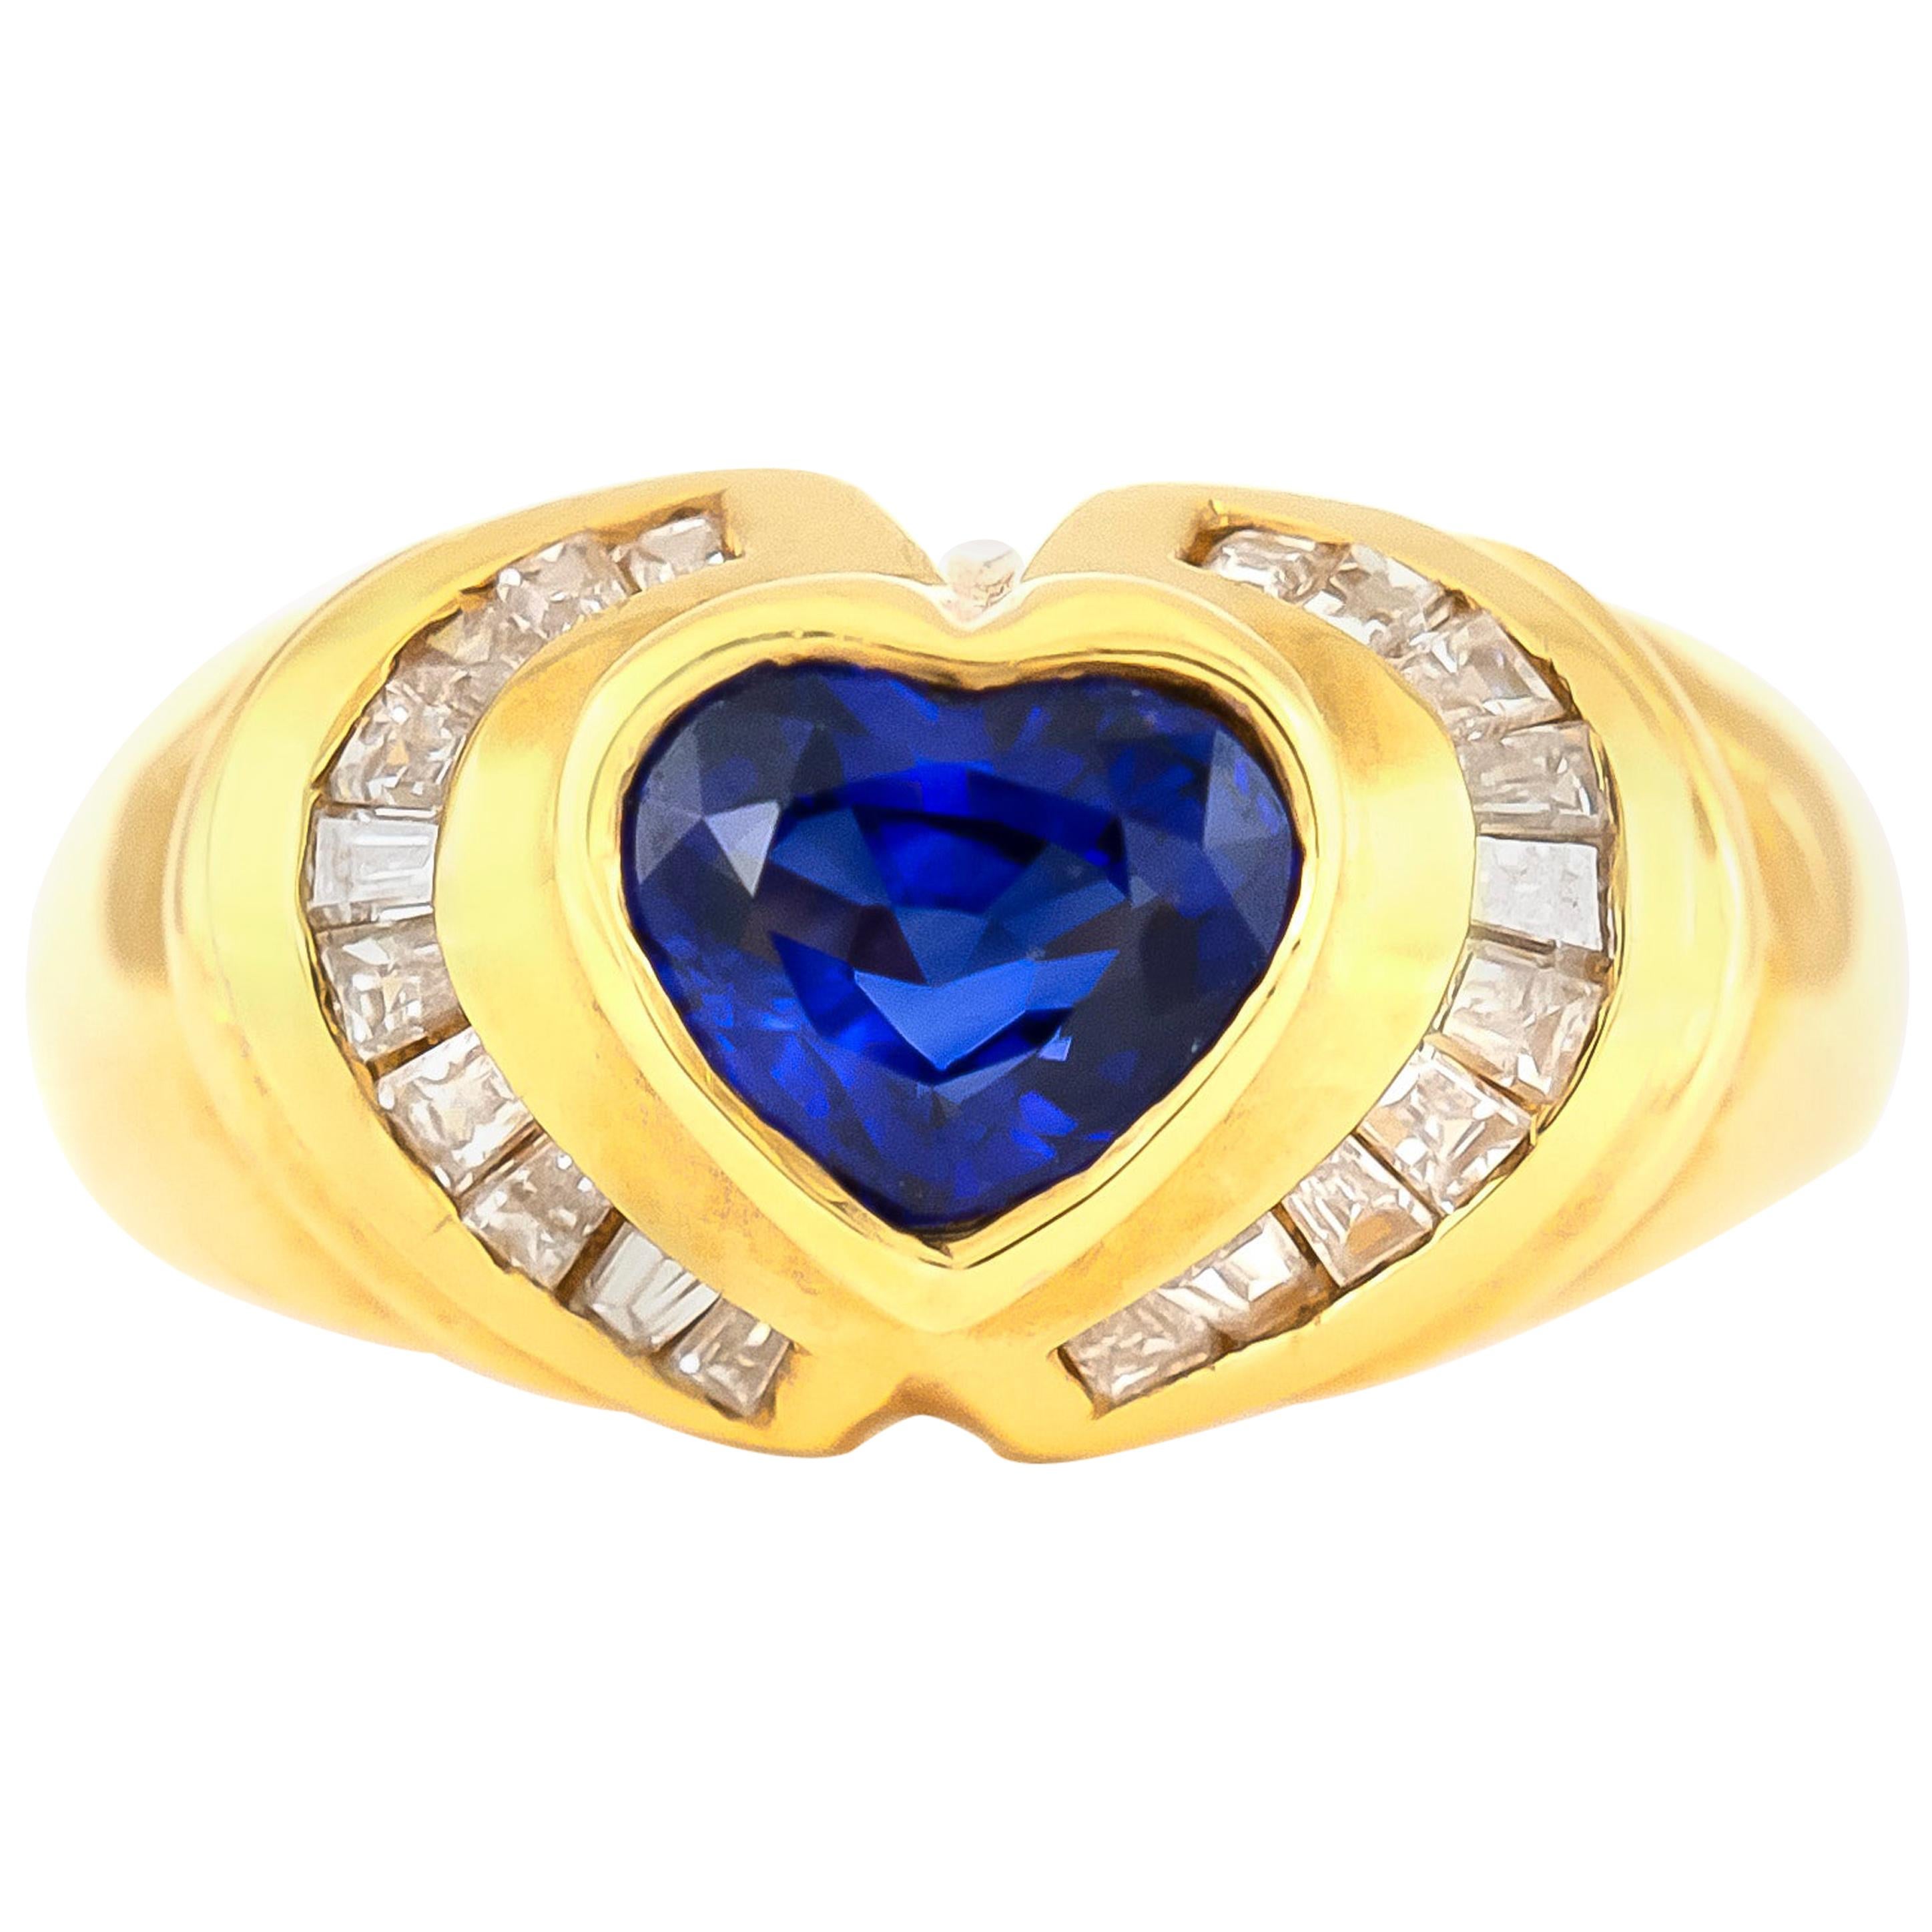 Synthetic Heart Sapphire with Emerald Cut Diamonds Ring